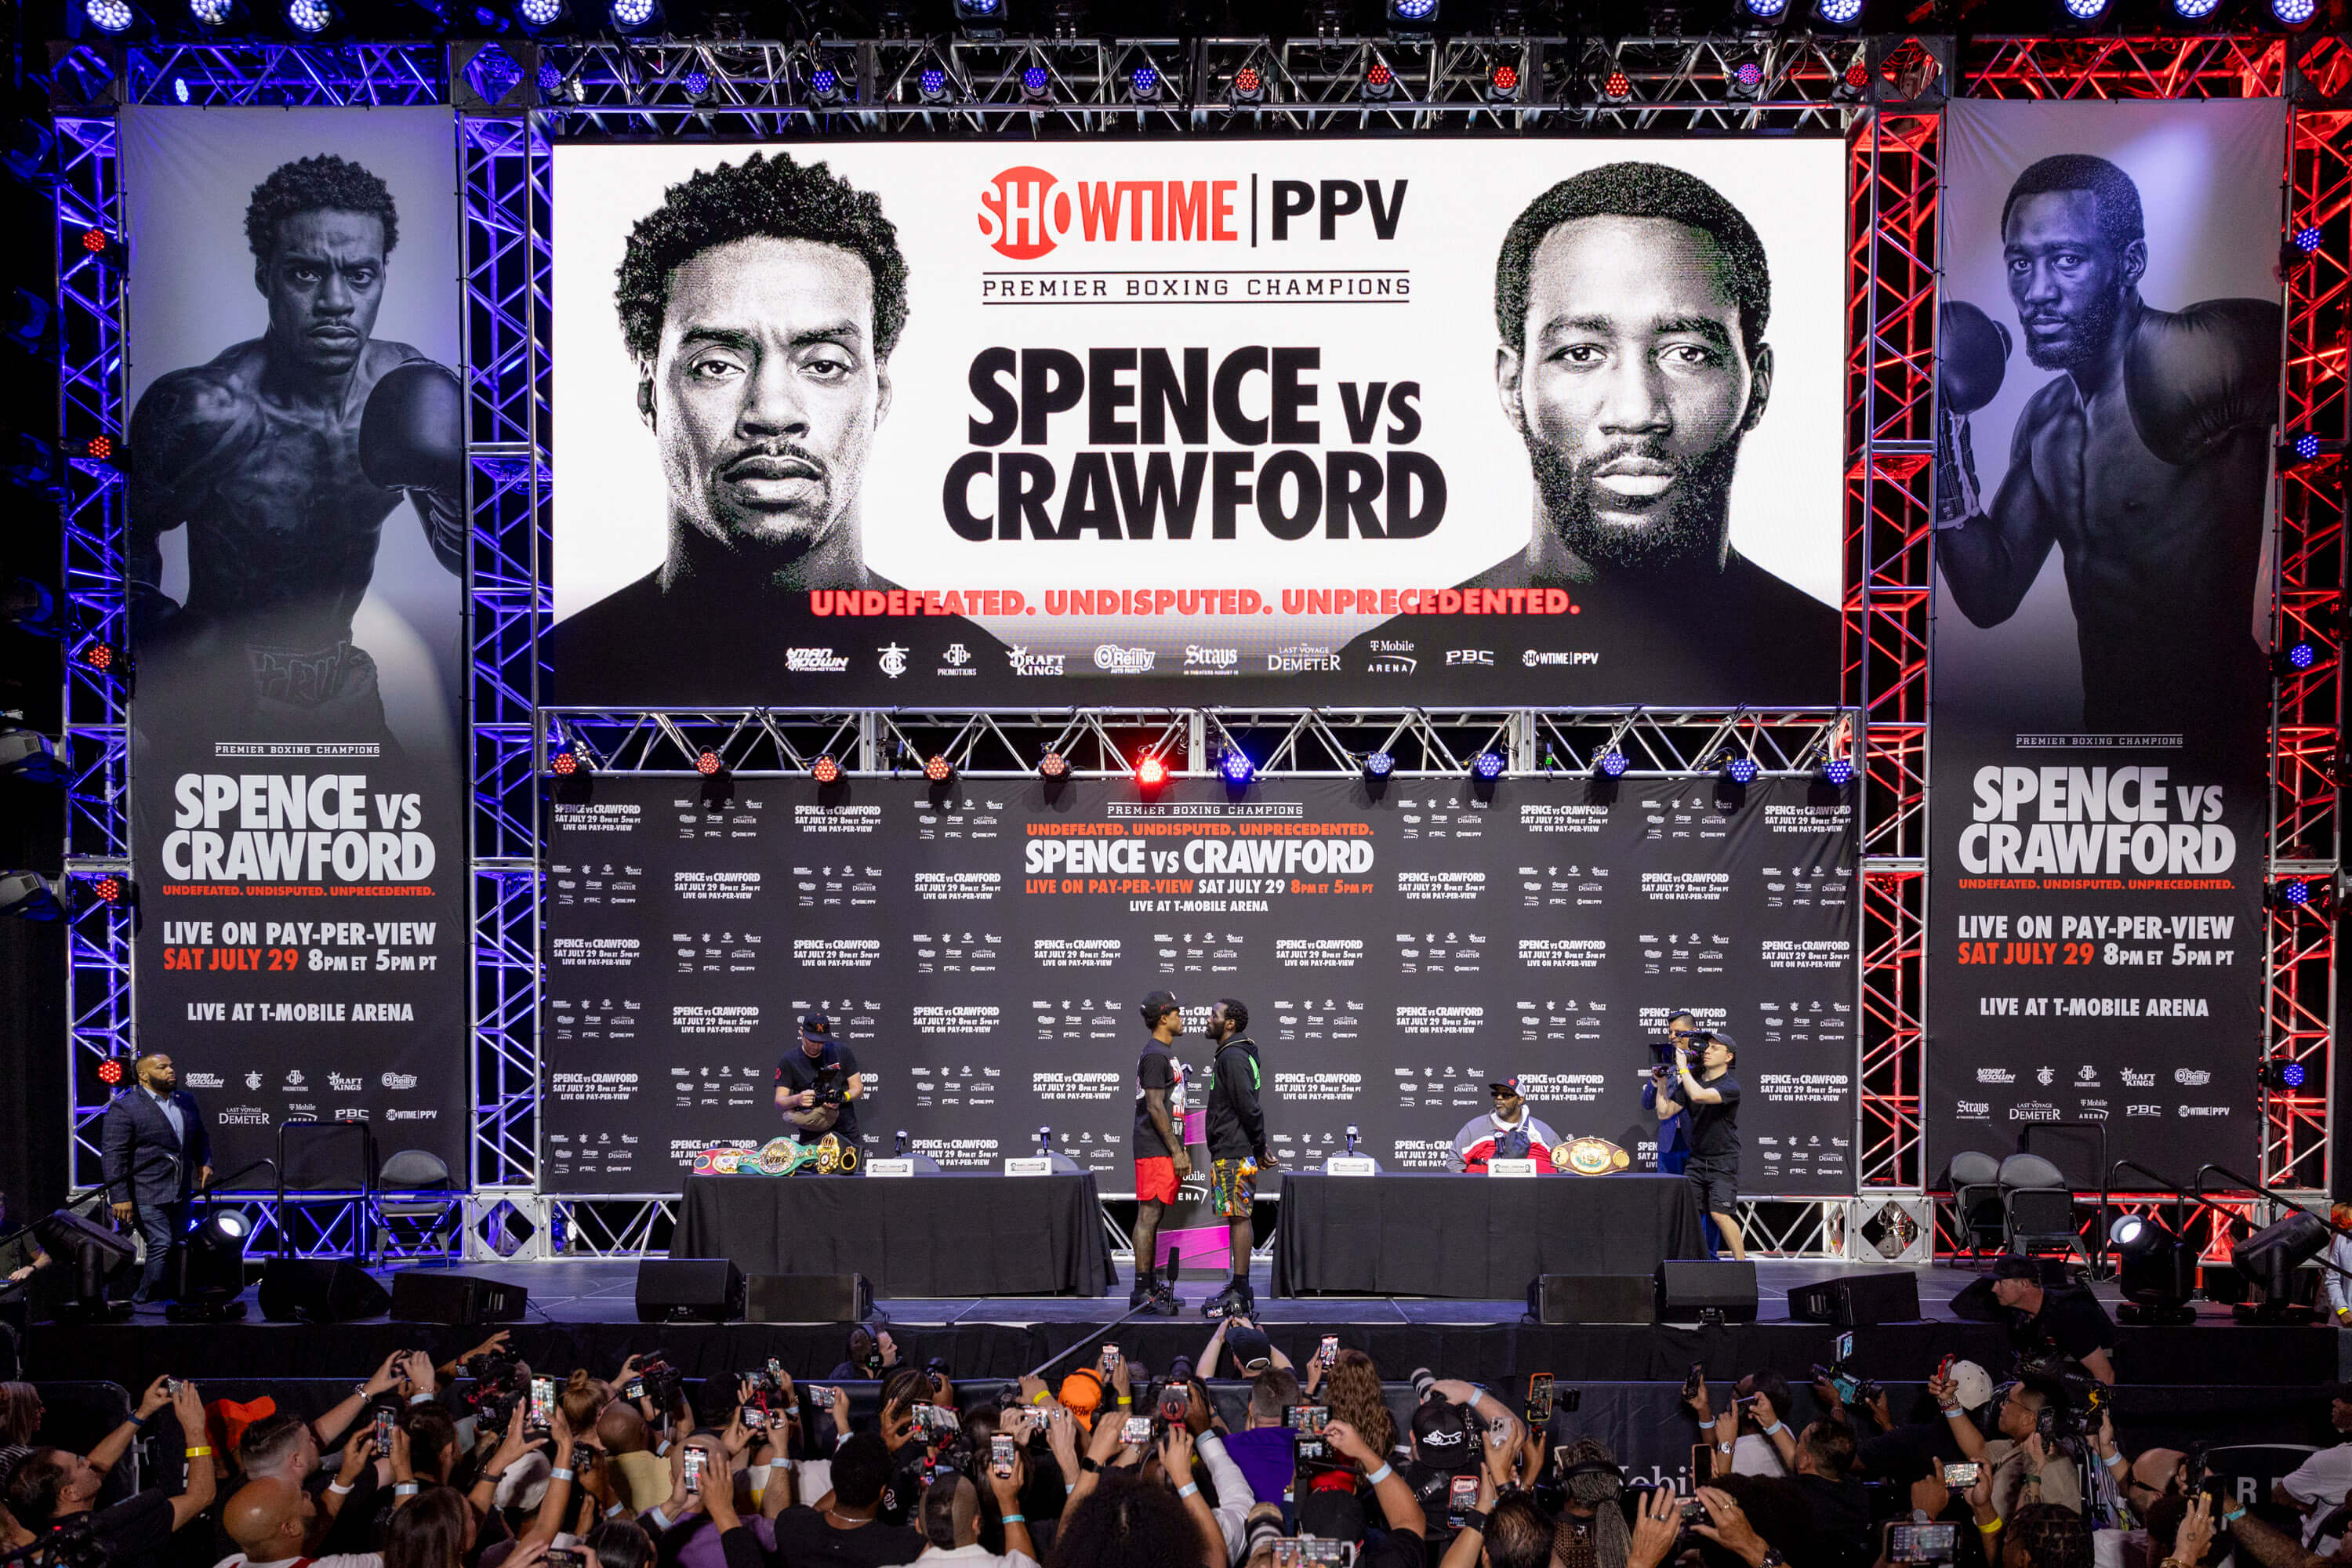 Schaefer says time is right for Spence-Crawford superfight